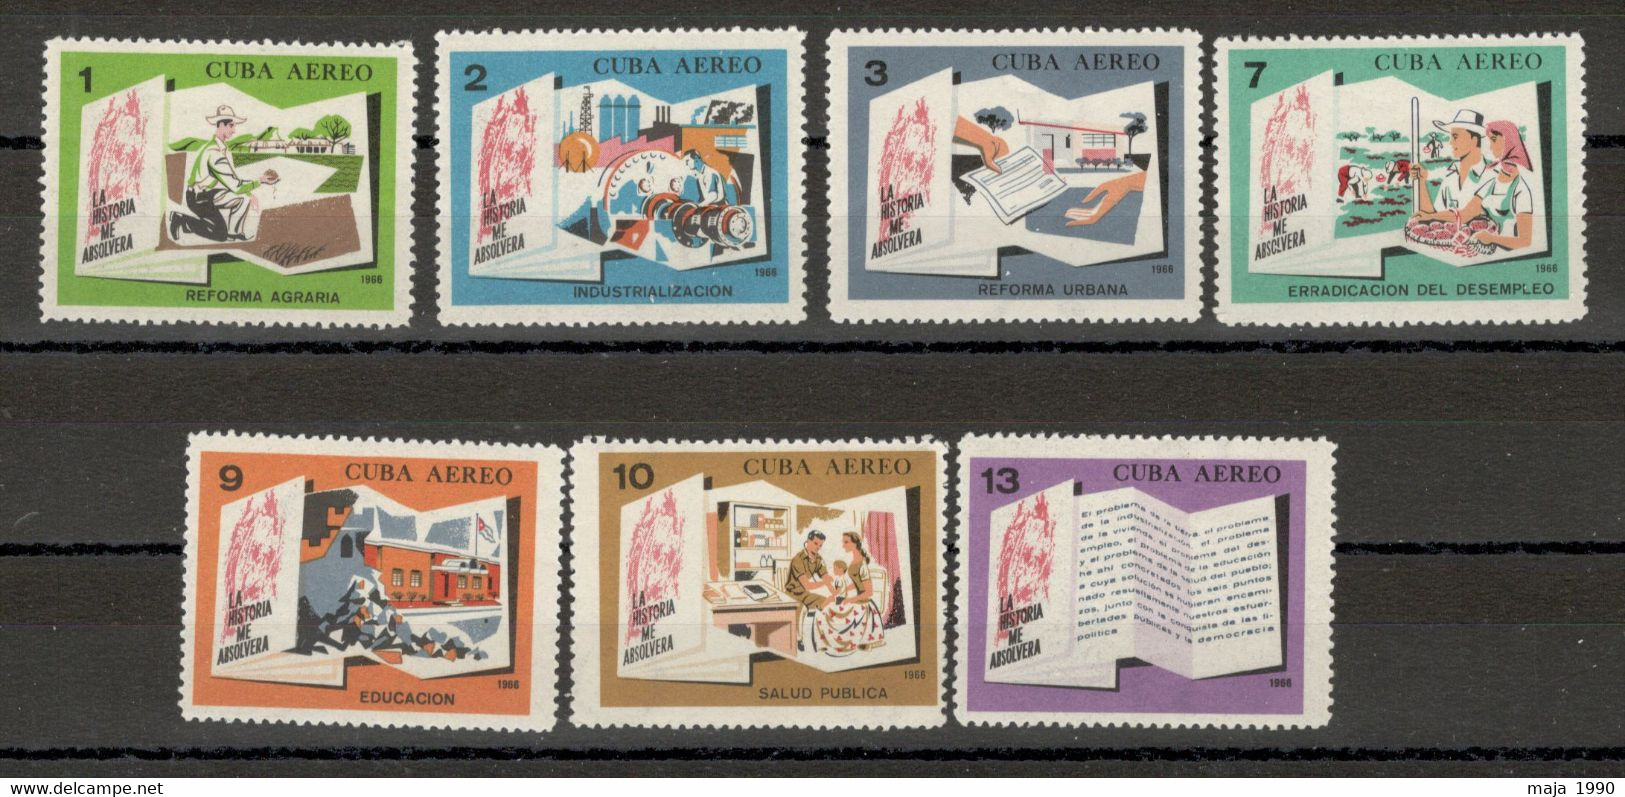 CUBA - MNH SET - INDUSTRY - AGRICULTURE - EDUCATION - 1968. - Unused Stamps